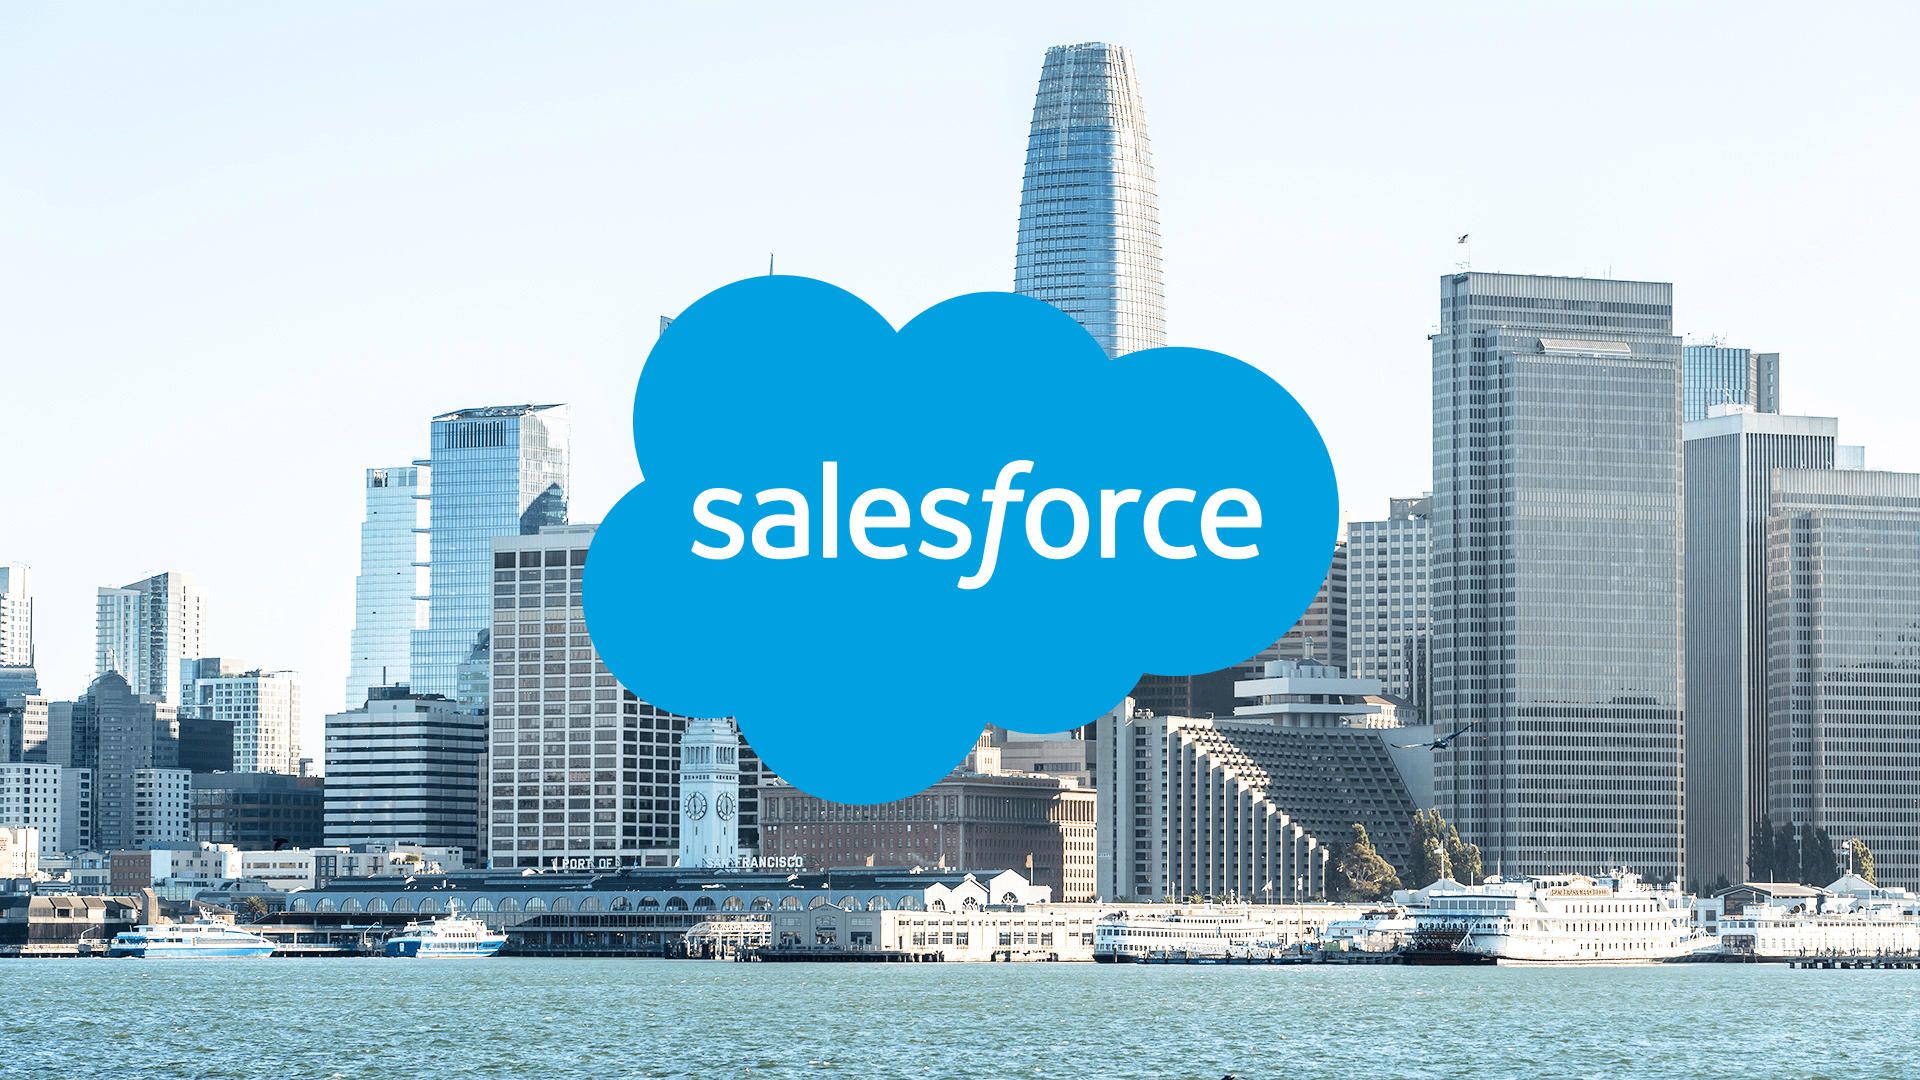 What is Salesforce